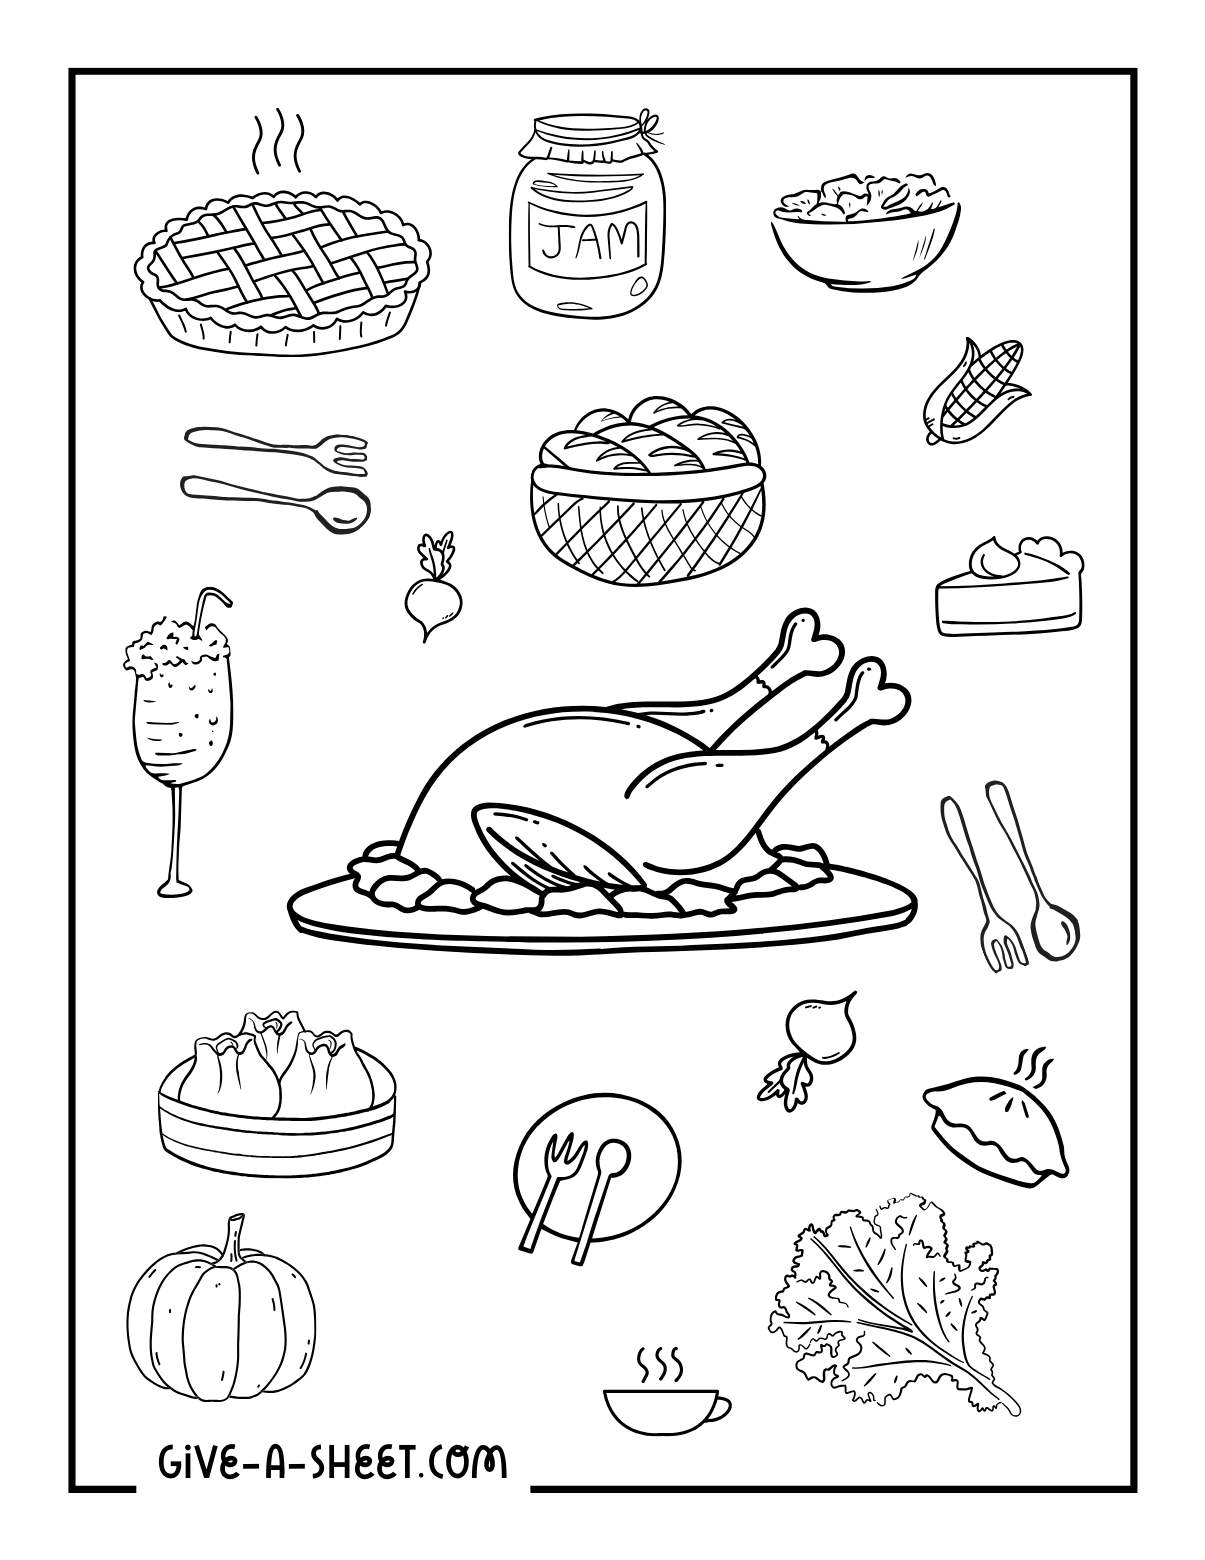 Thanksgiving dinner table with turkey coloring pages.